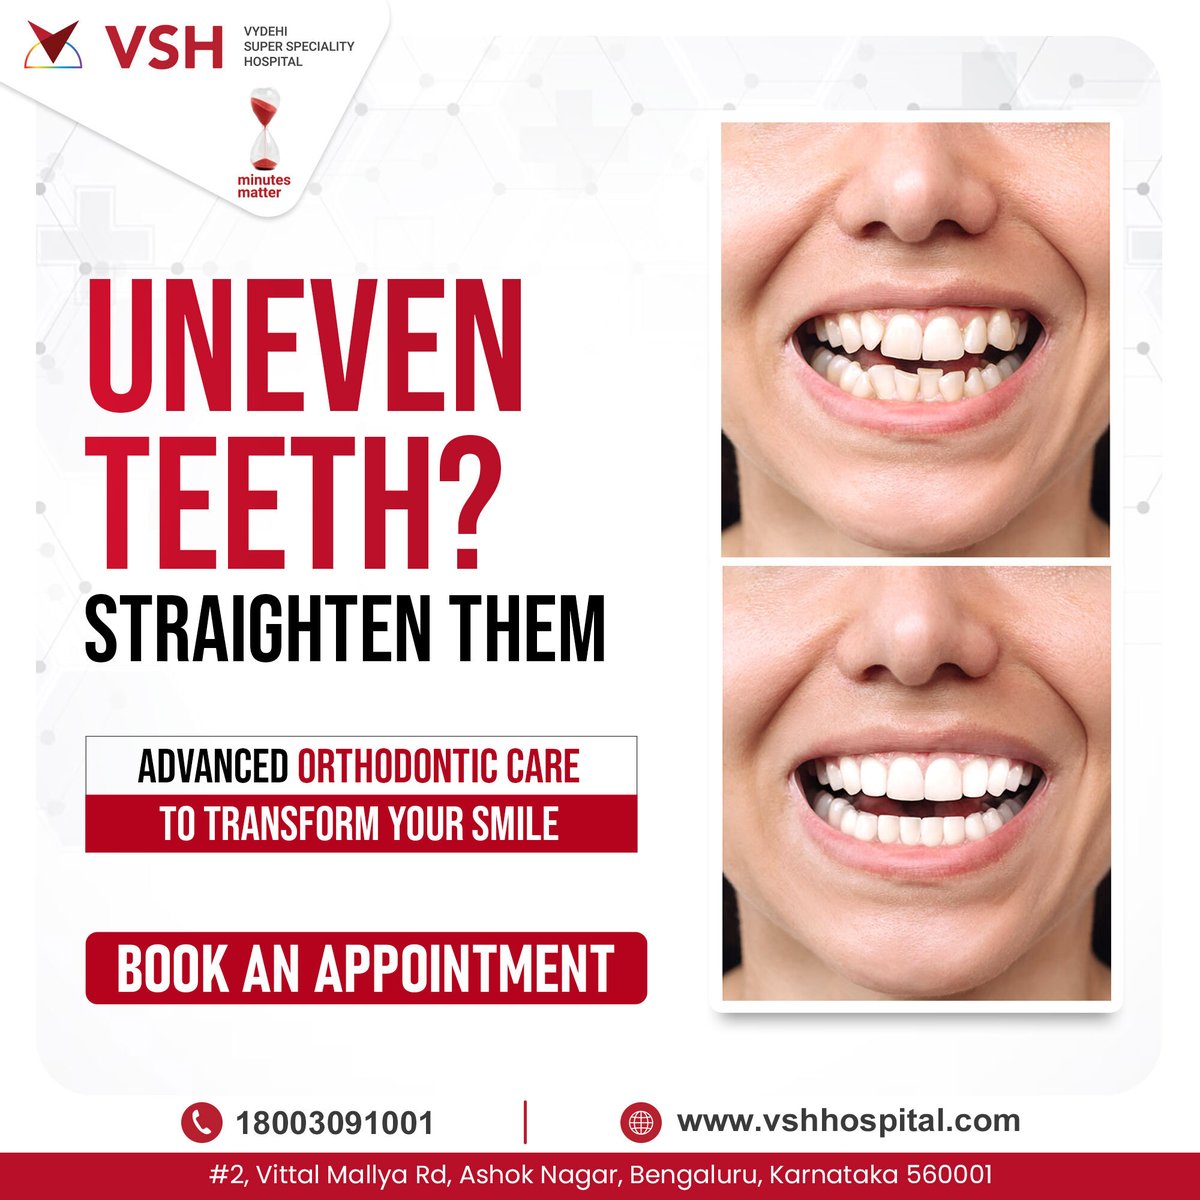 Uneven Teeth Got You Down? Get a confident smile with VSH Hospital's advanced #OrthodonticTreatment!  We offer traditional #Braces & #InvisibleBraces to straighten your teeth discreetly. #AlignYourTeeth & achieve lasting results! #UnevenTeeth #OrthodonticTreatment